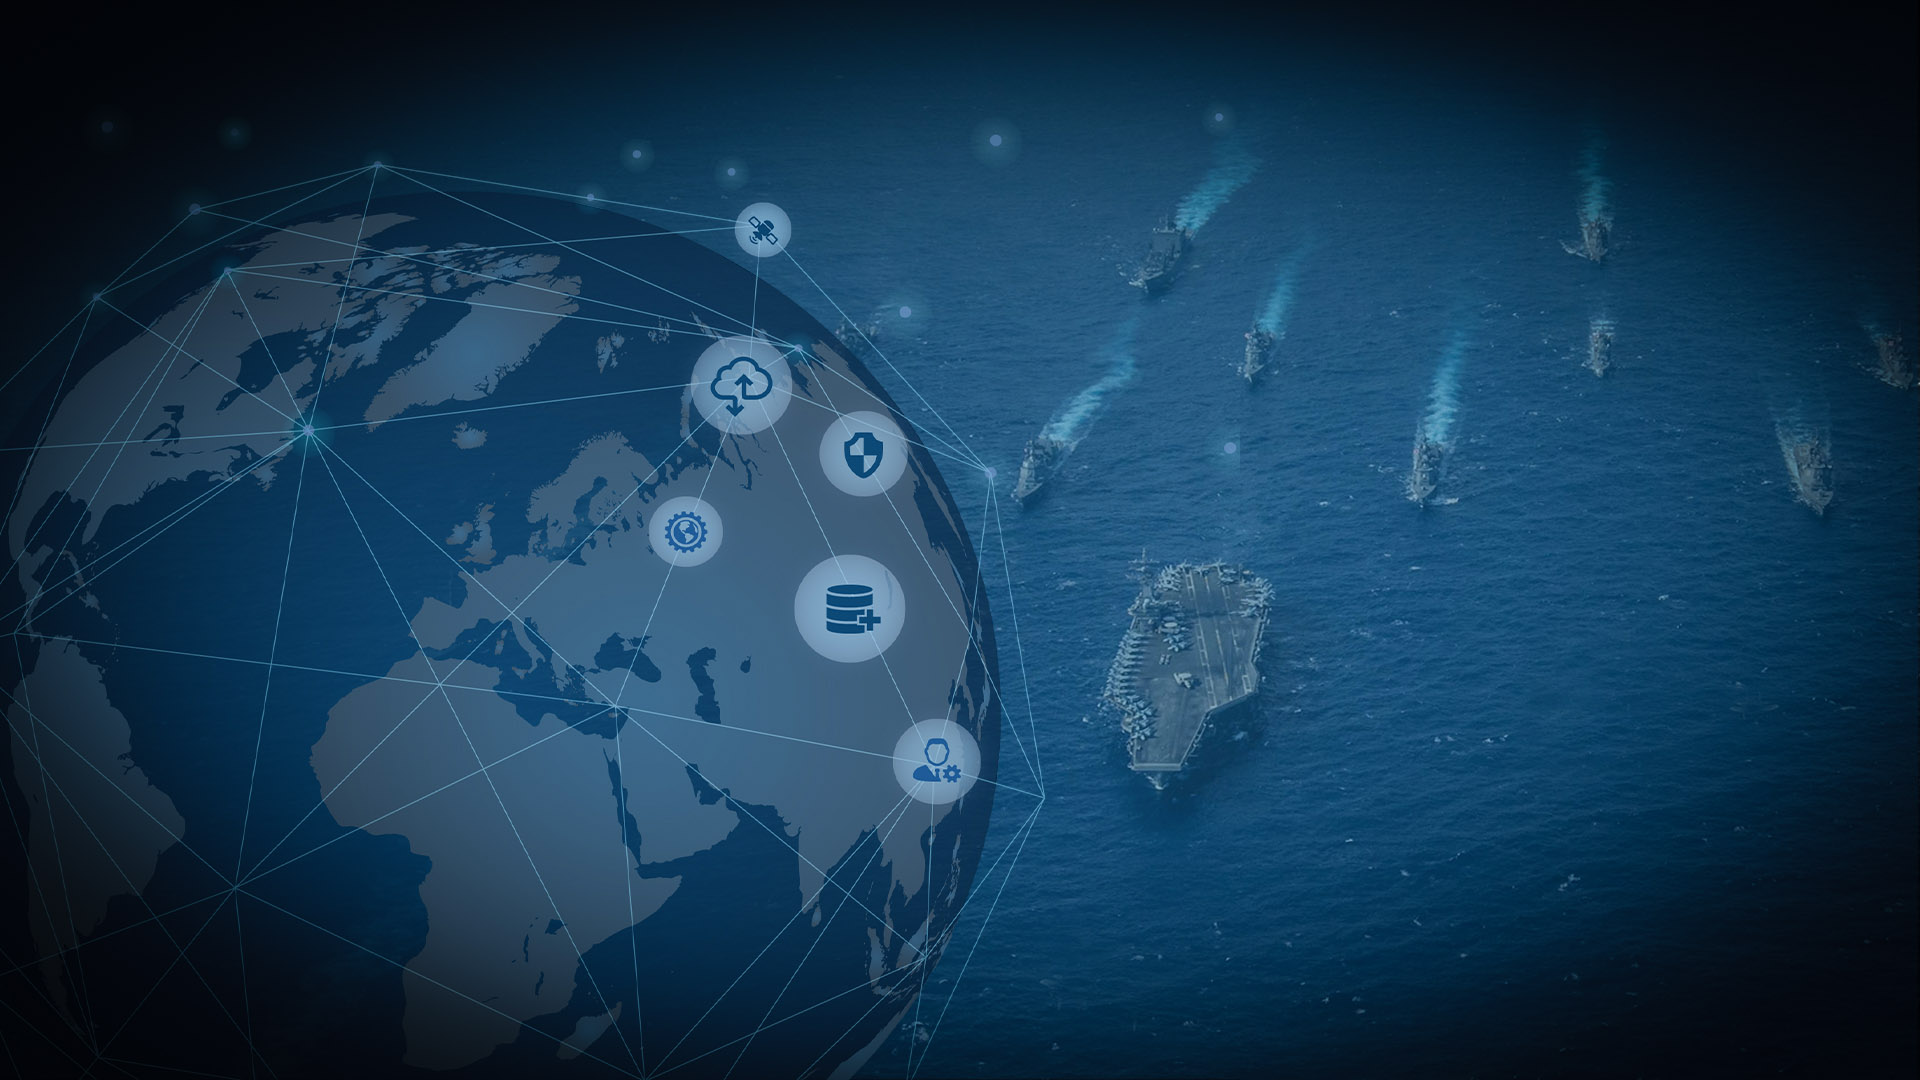 A globe is shown with network icons (security, database & cloud), right aircraft carrier and ships